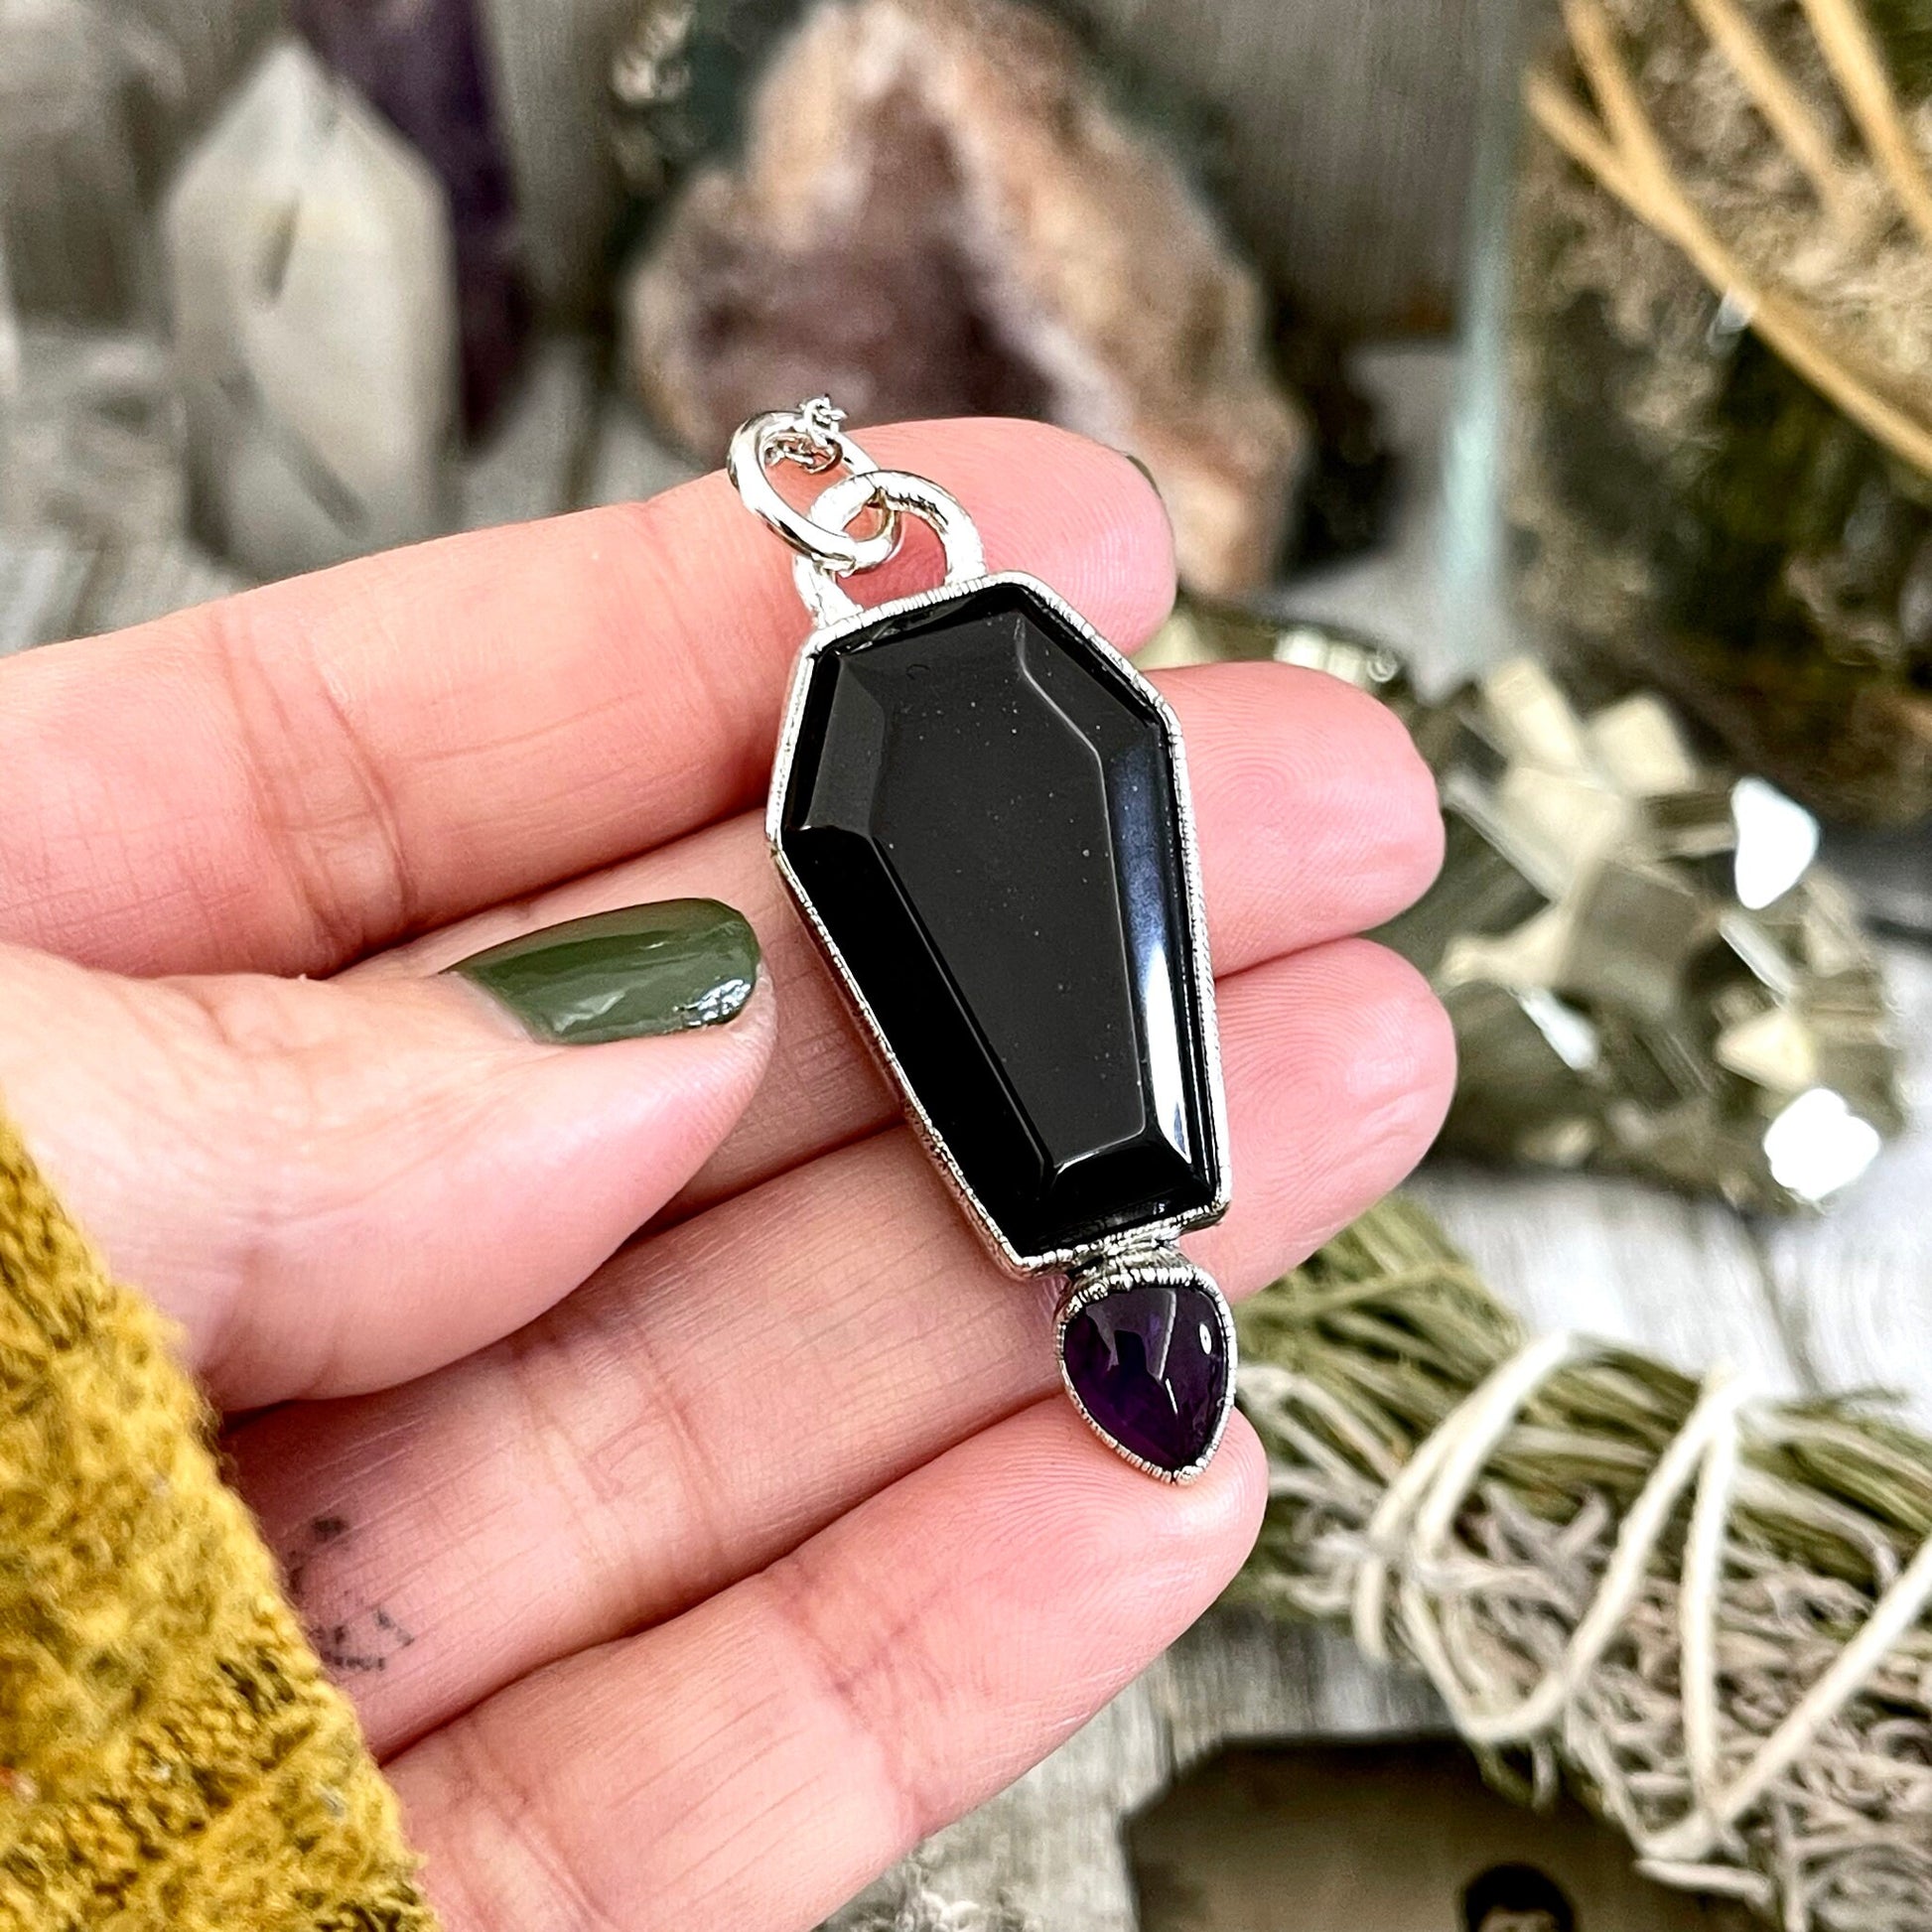 Crystal Coffin Black Onyx and Amethyst Necklace / Gothic Jewelry - Foxlark Crystal Jewelry